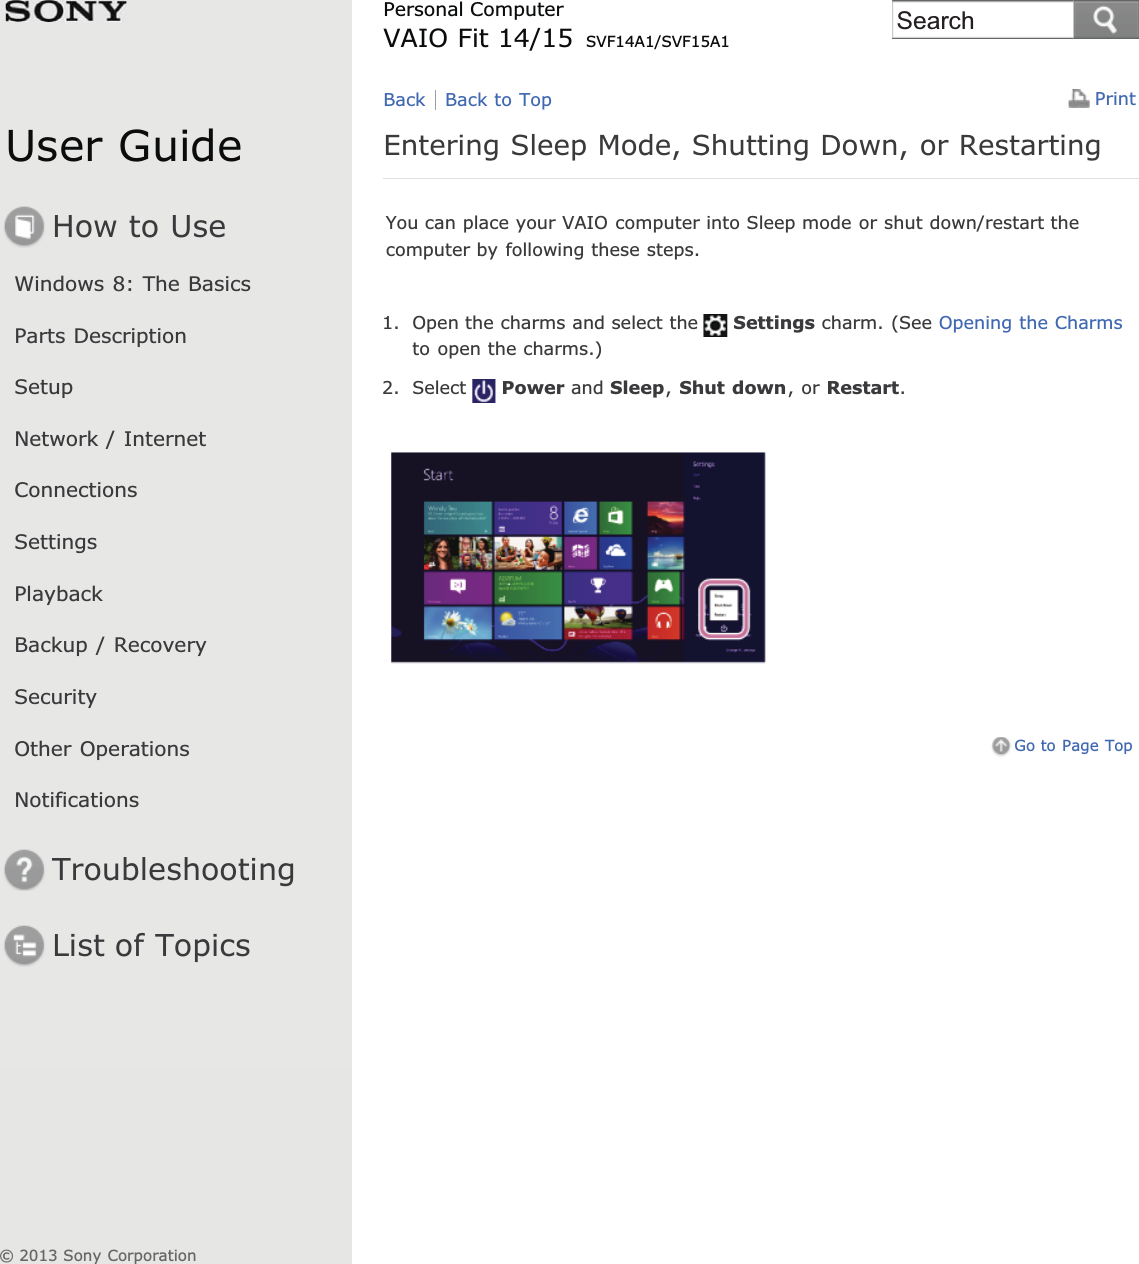 User GuideHow to UseWindows 8: The BasicsParts DescriptionSetupNetwork / InternetConnectionsSettingsPlaybackBackup / RecoverySecurityOther OperationsNotificationsTroubleshootingList of TopicsPrintPersonal ComputerVAIO Fit 14/15 SVF14A1/SVF15A1Entering Sleep Mode, Shutting Down, or RestartingYou can place your VAIO computer into Sleep mode or shut down/restart thecomputer by following these steps.1. Open the charms and select the Settings charm. (See Opening the Charmsto open the charms.)2. Select Power and Sleep,Shut down, or Restart.Go to Page TopBack Back to Top© 2013 Sony CorporationSearch